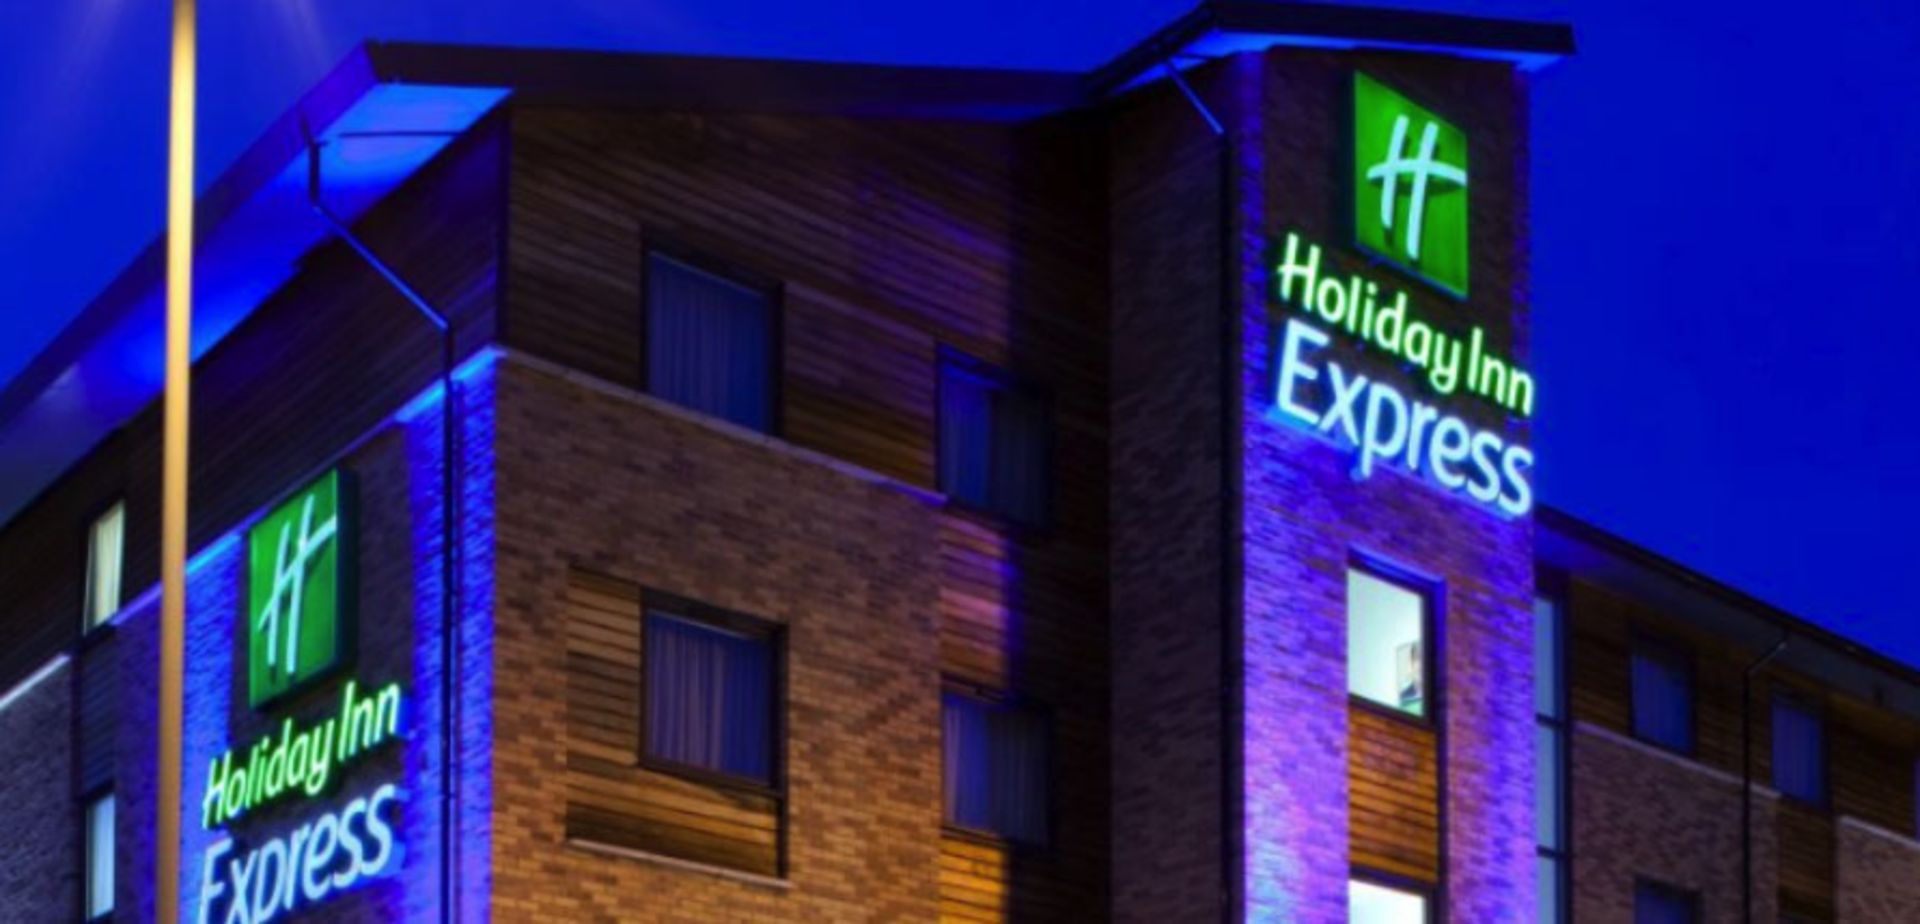 Two nights in a family room (2 adults and 2 children) in the 3* Holiday Inn Express Hemel Hempstead.